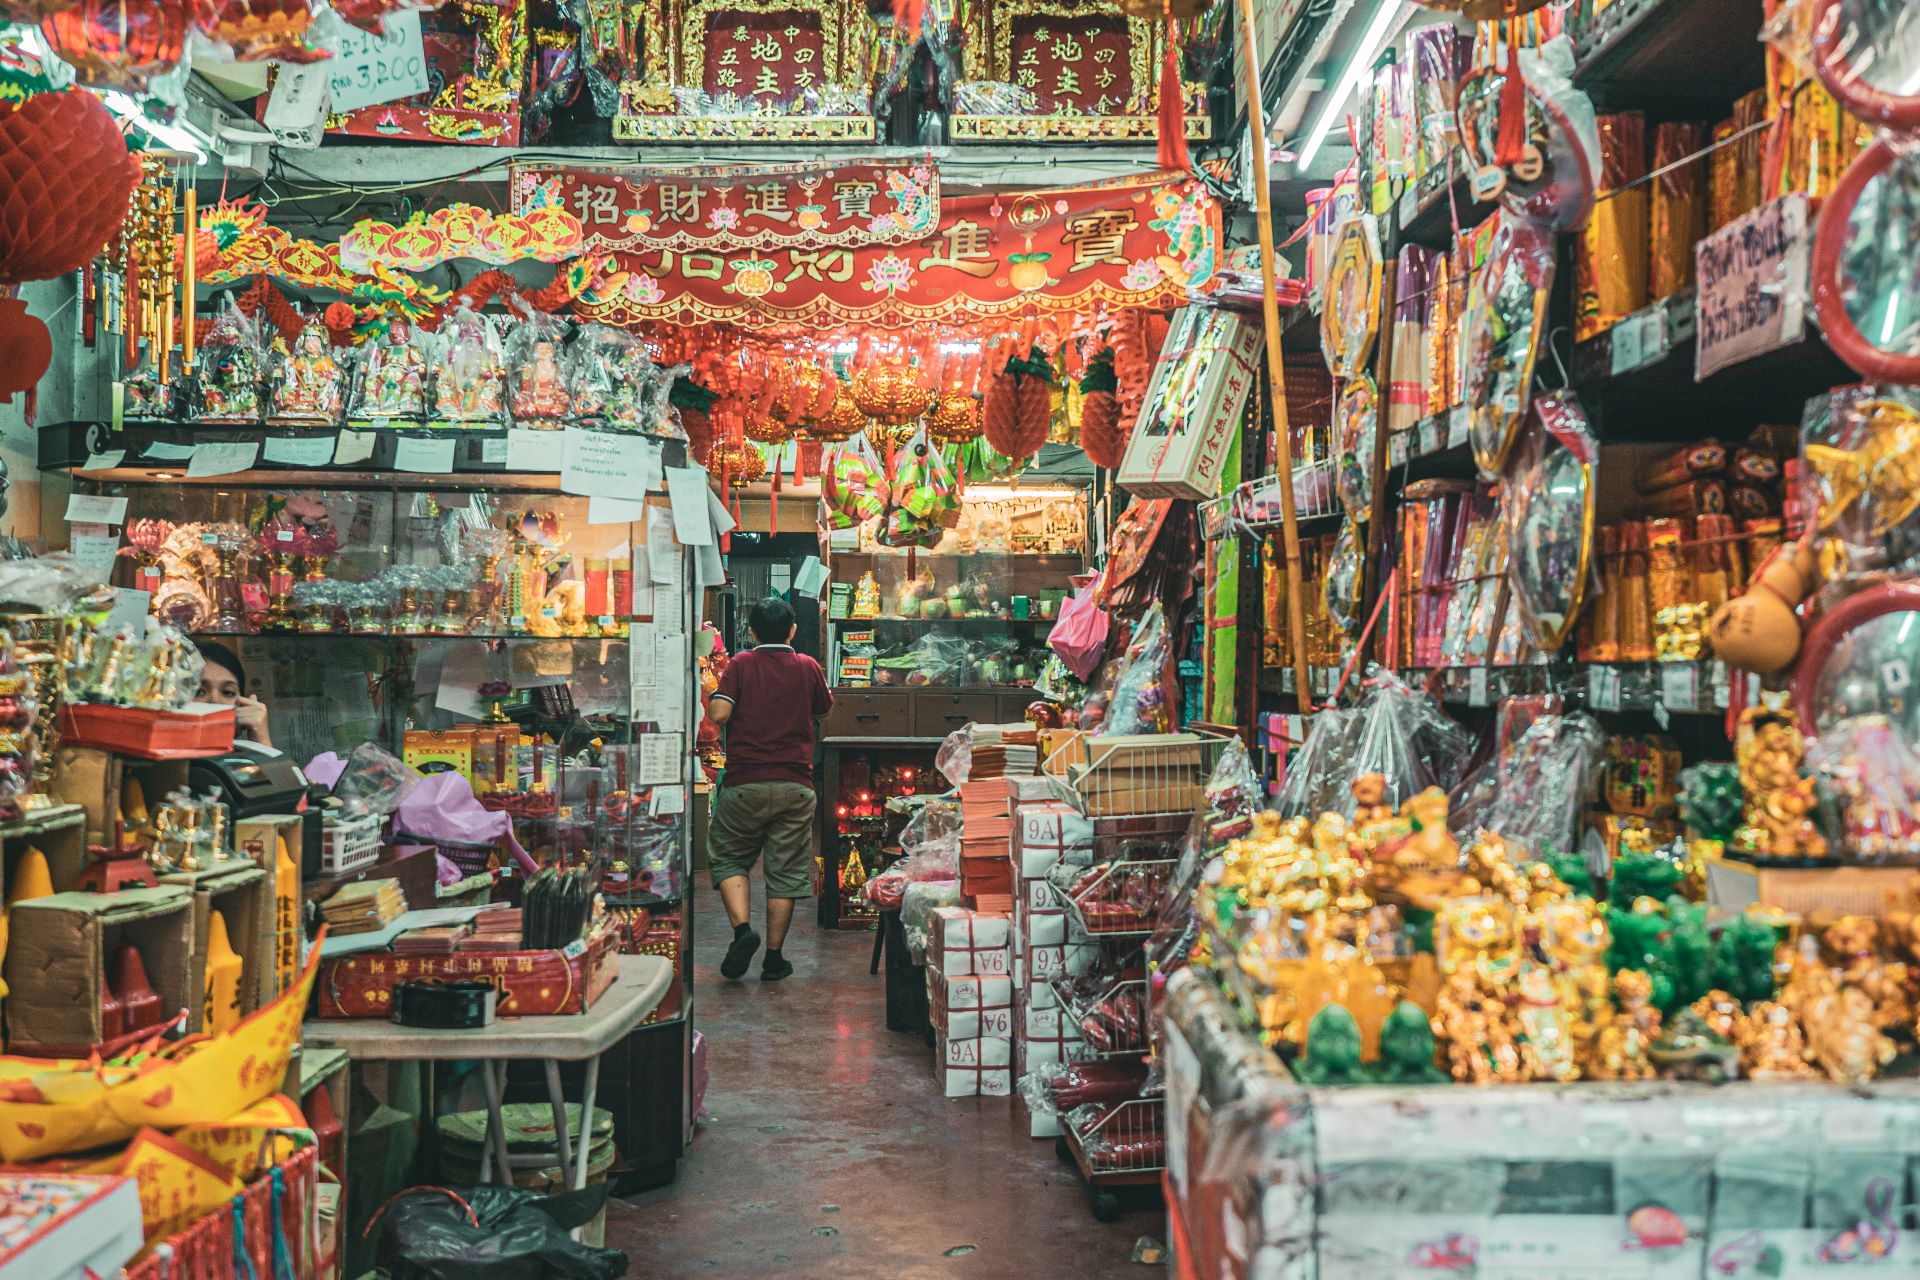 A colourful indoor market scene with tables and shelves full of haphazard produce and a man walking away in the background.